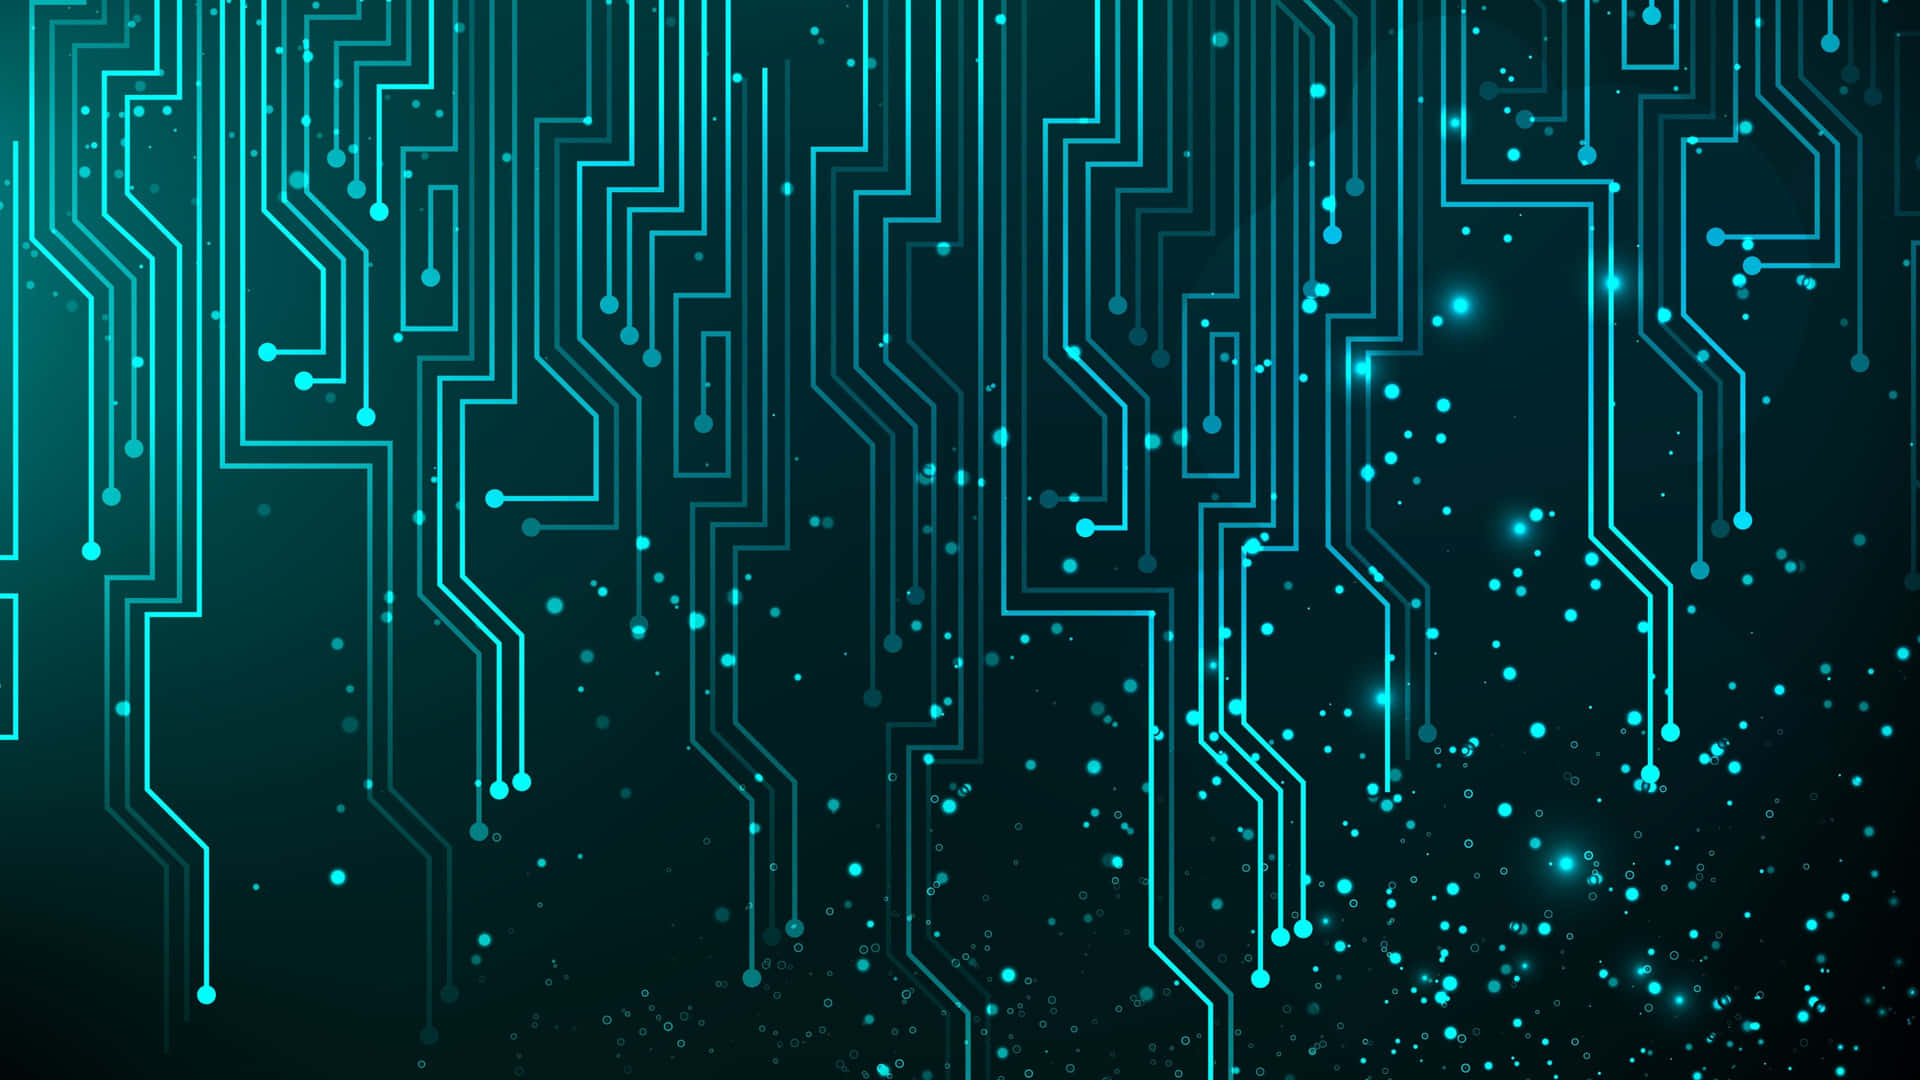 Abstract Circuitry Background Wallpaper